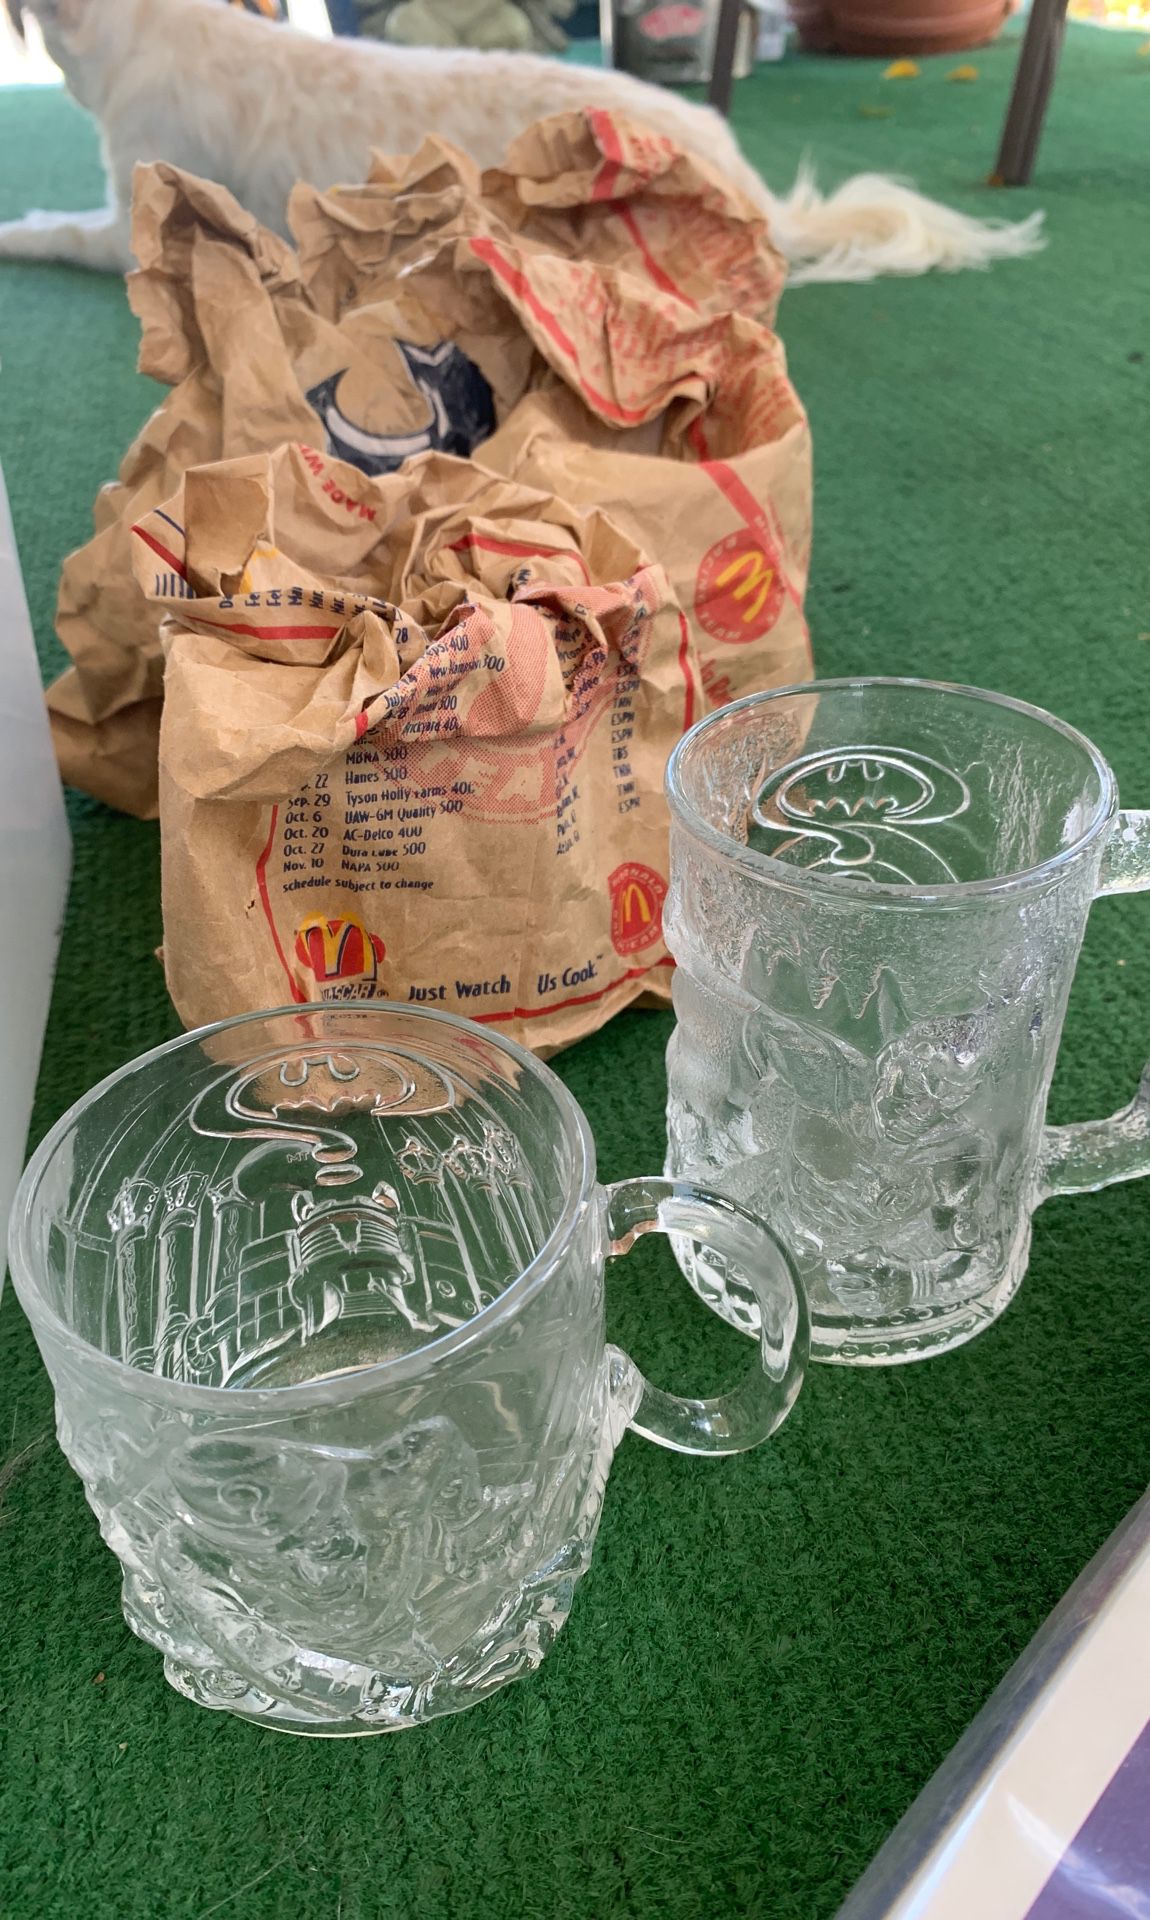 6 McDonald’s collectible action figure glass cups